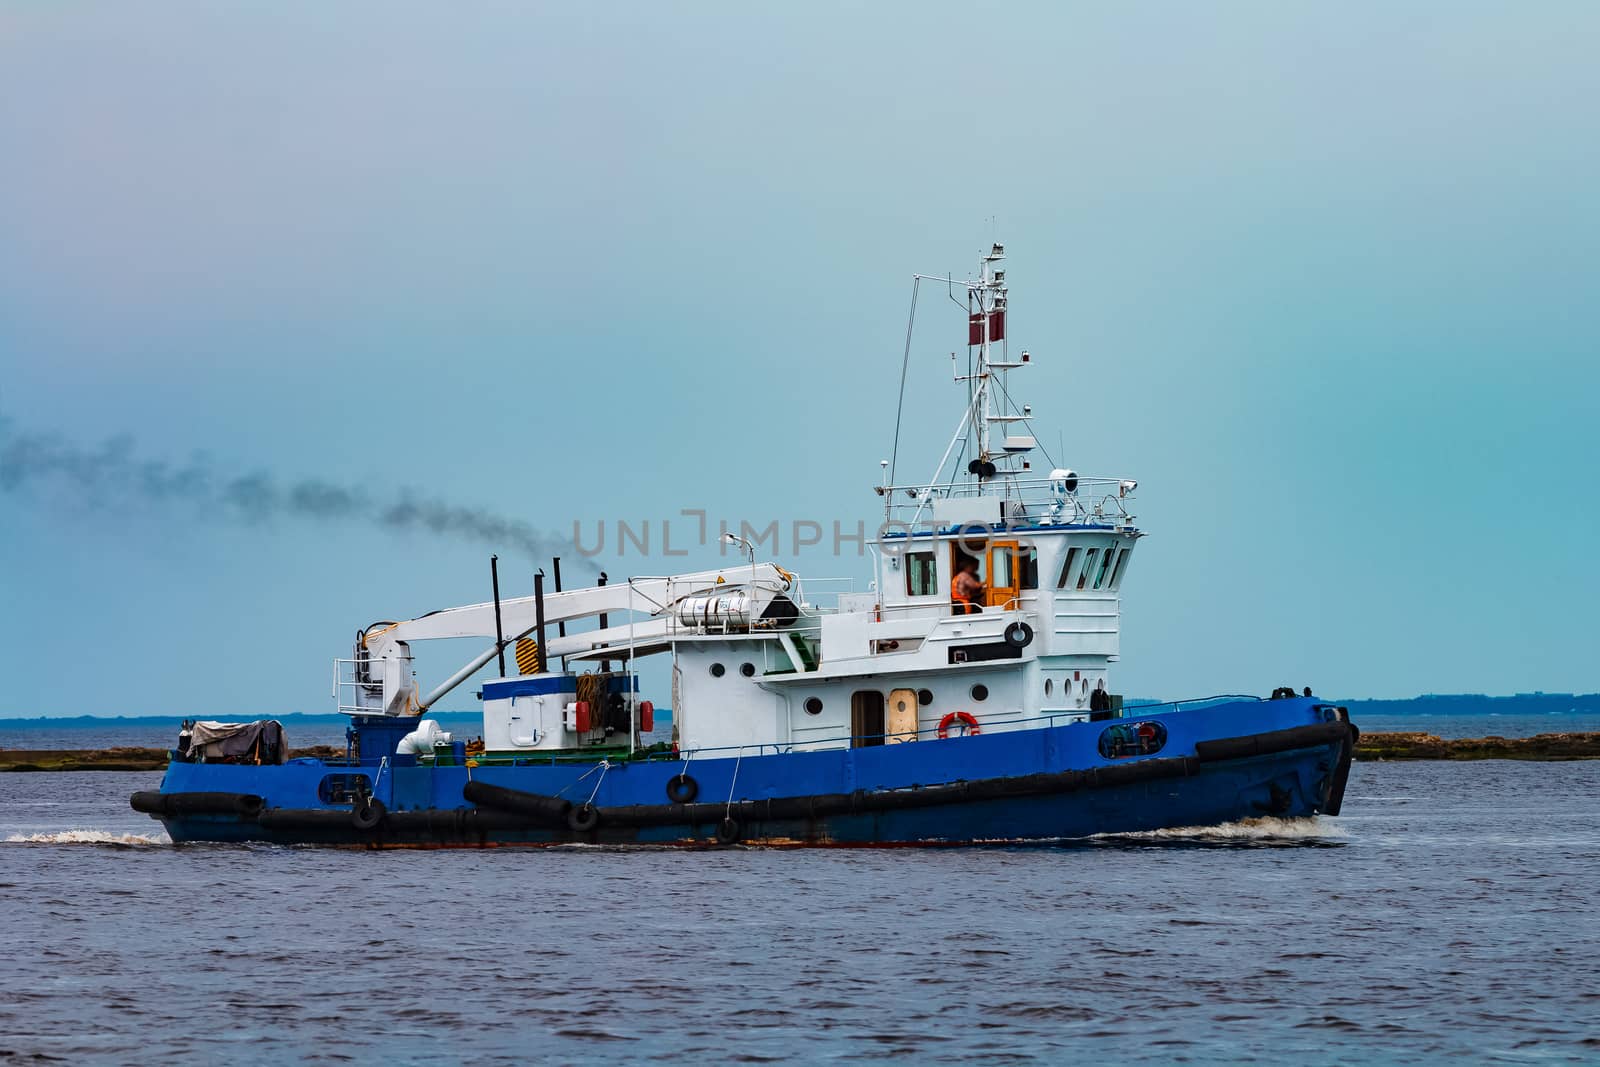 Blue tug ship moving to the cargo terminal. Industrial services